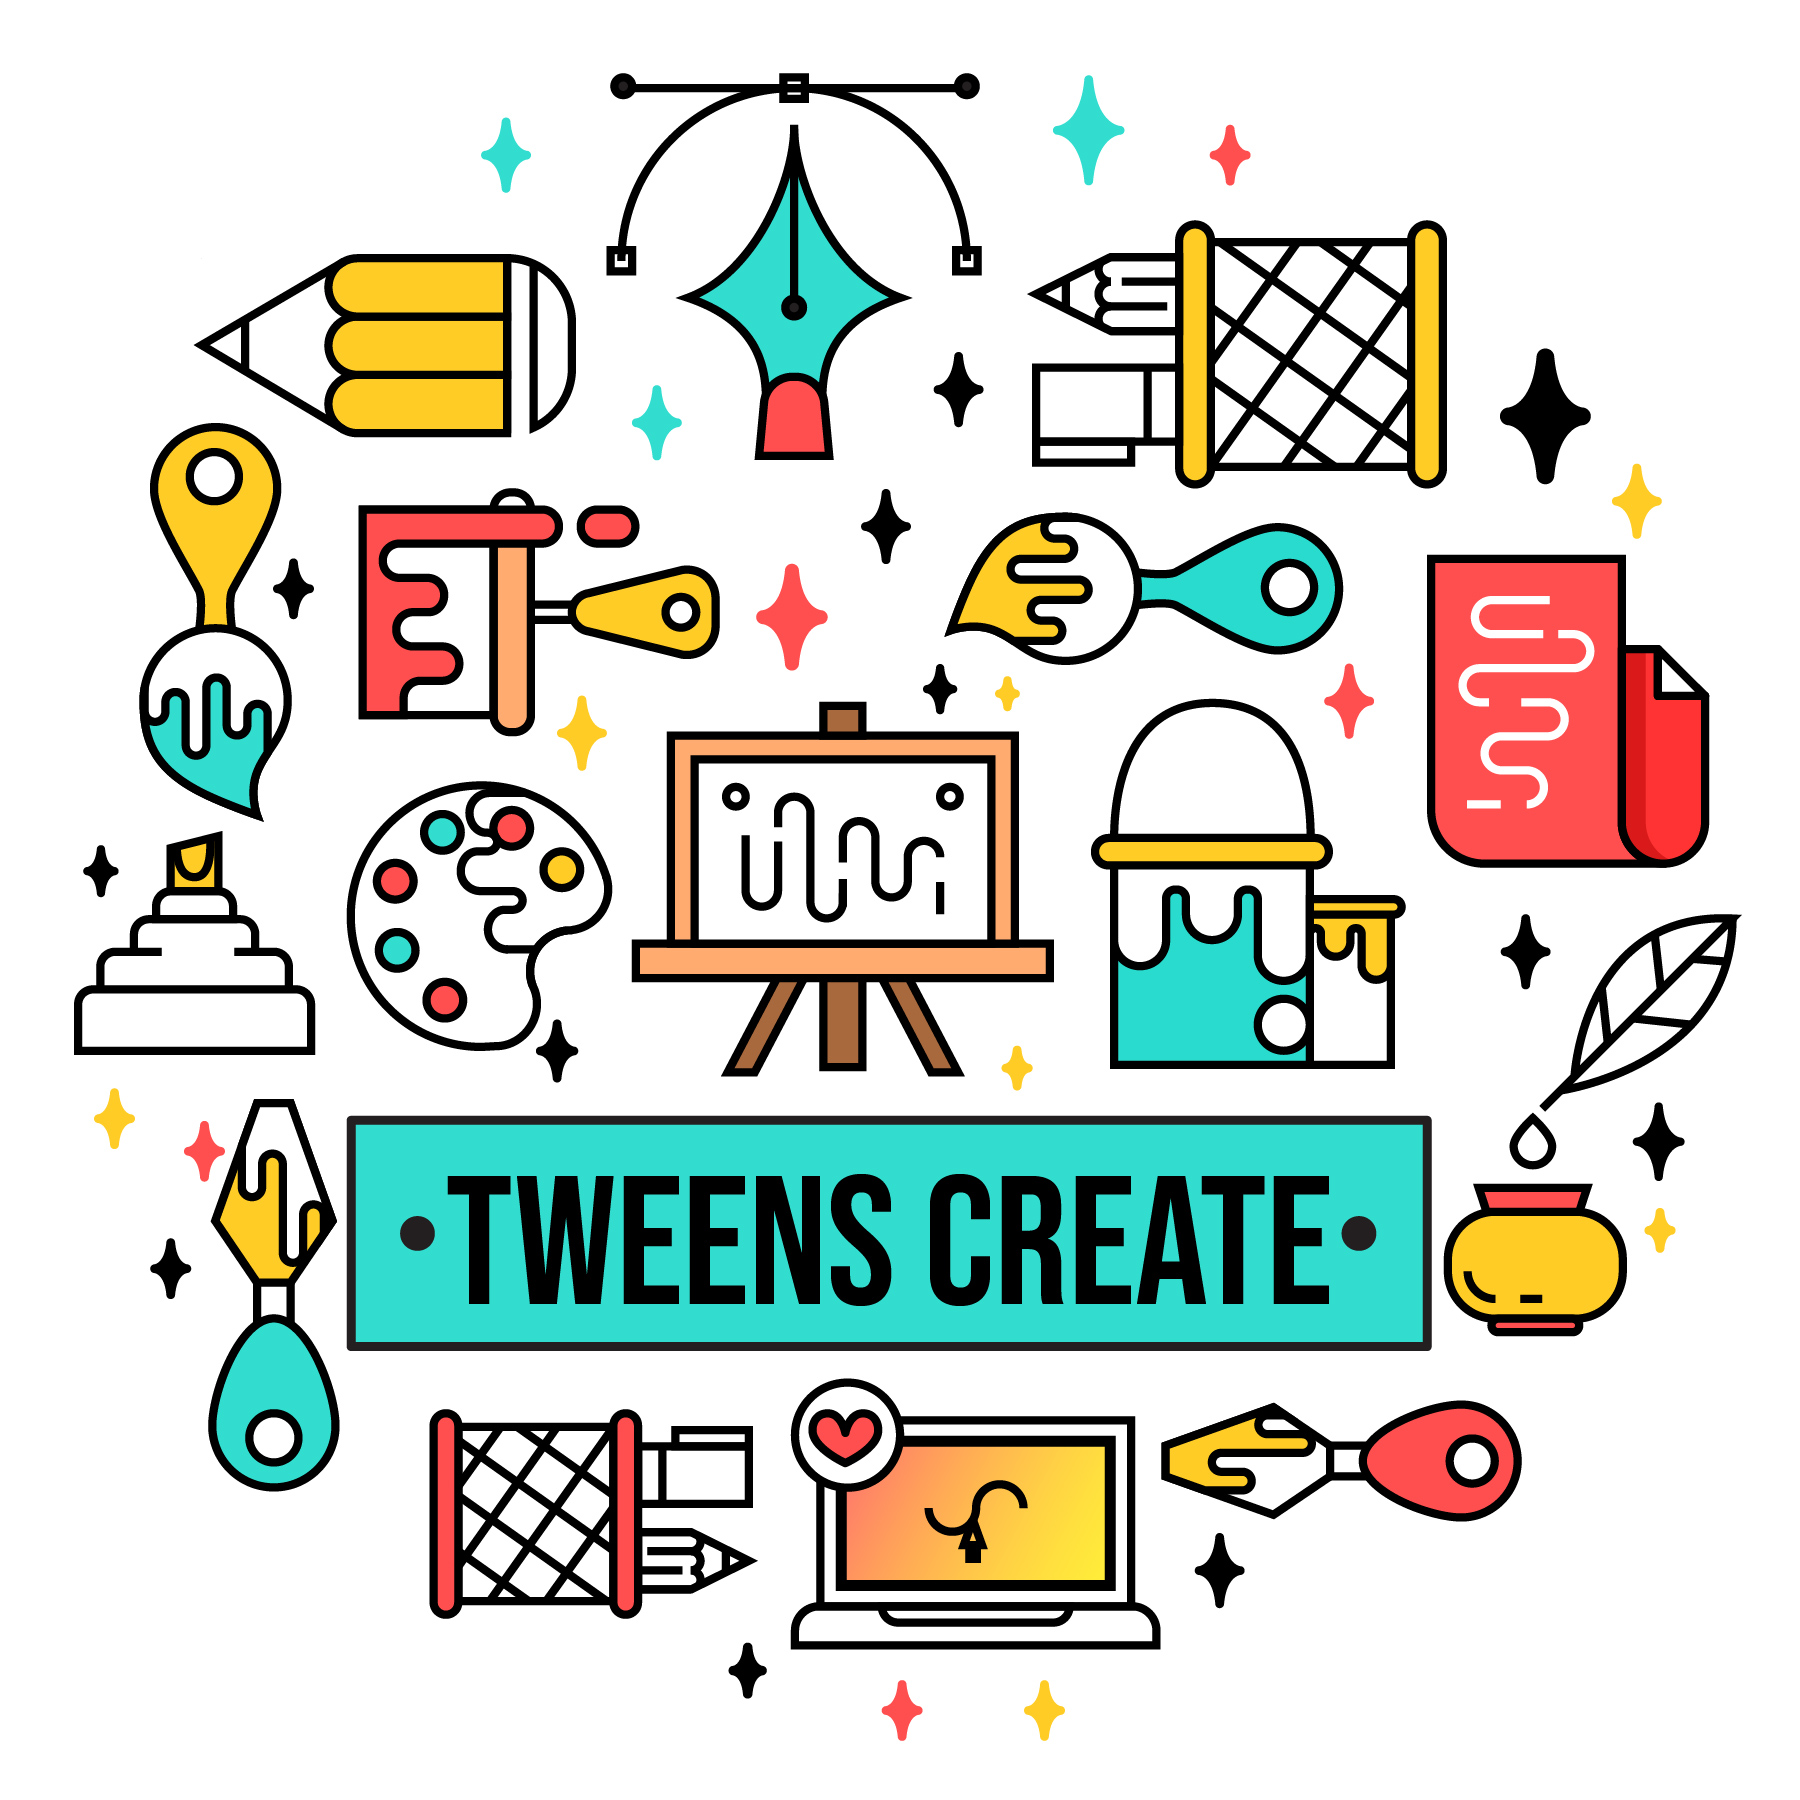 "Tweens Create" text surrounded by crafting objects